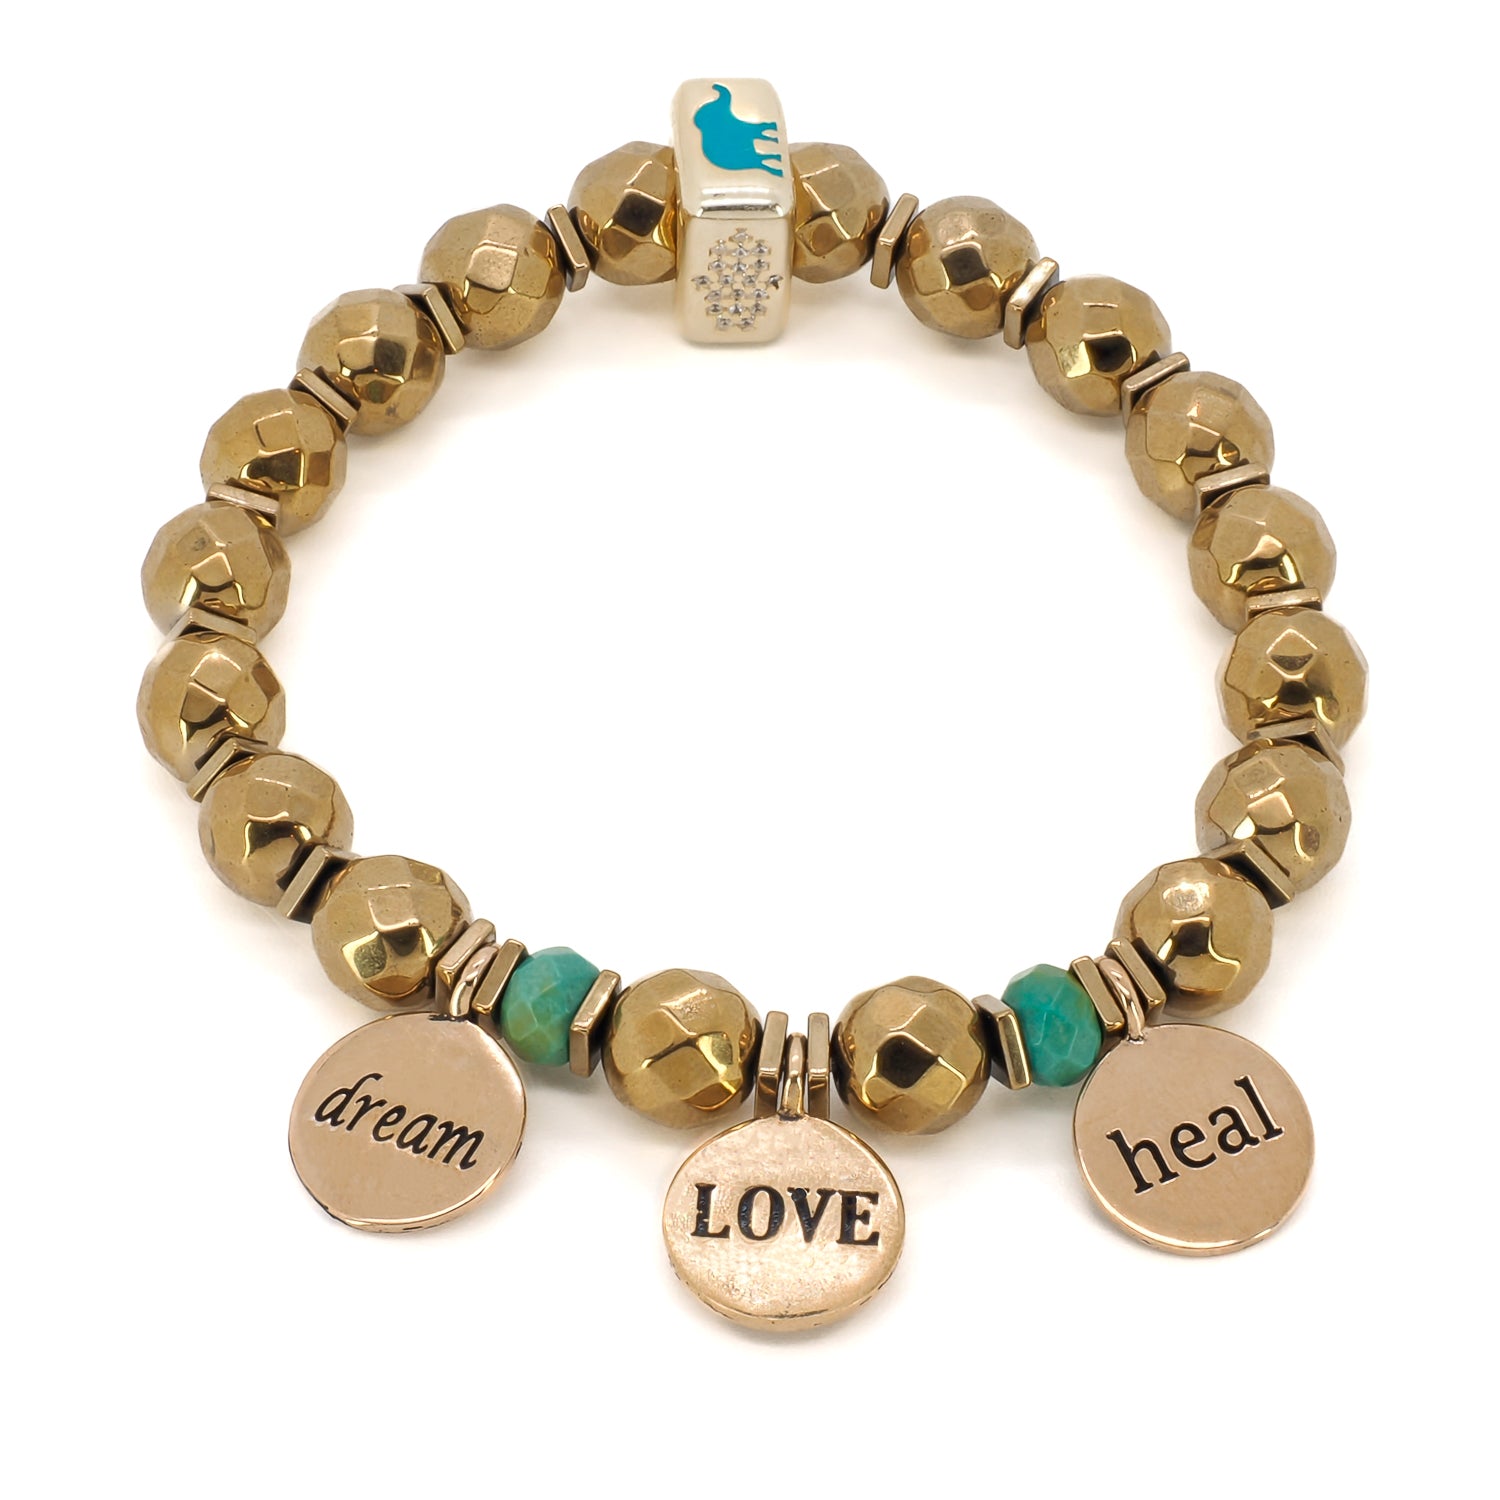 The Best Wishes Bracelet is a stunning piece featuring dream, love, and heal letter charms and Hamsa, Evil Eye, and elephant symbols.